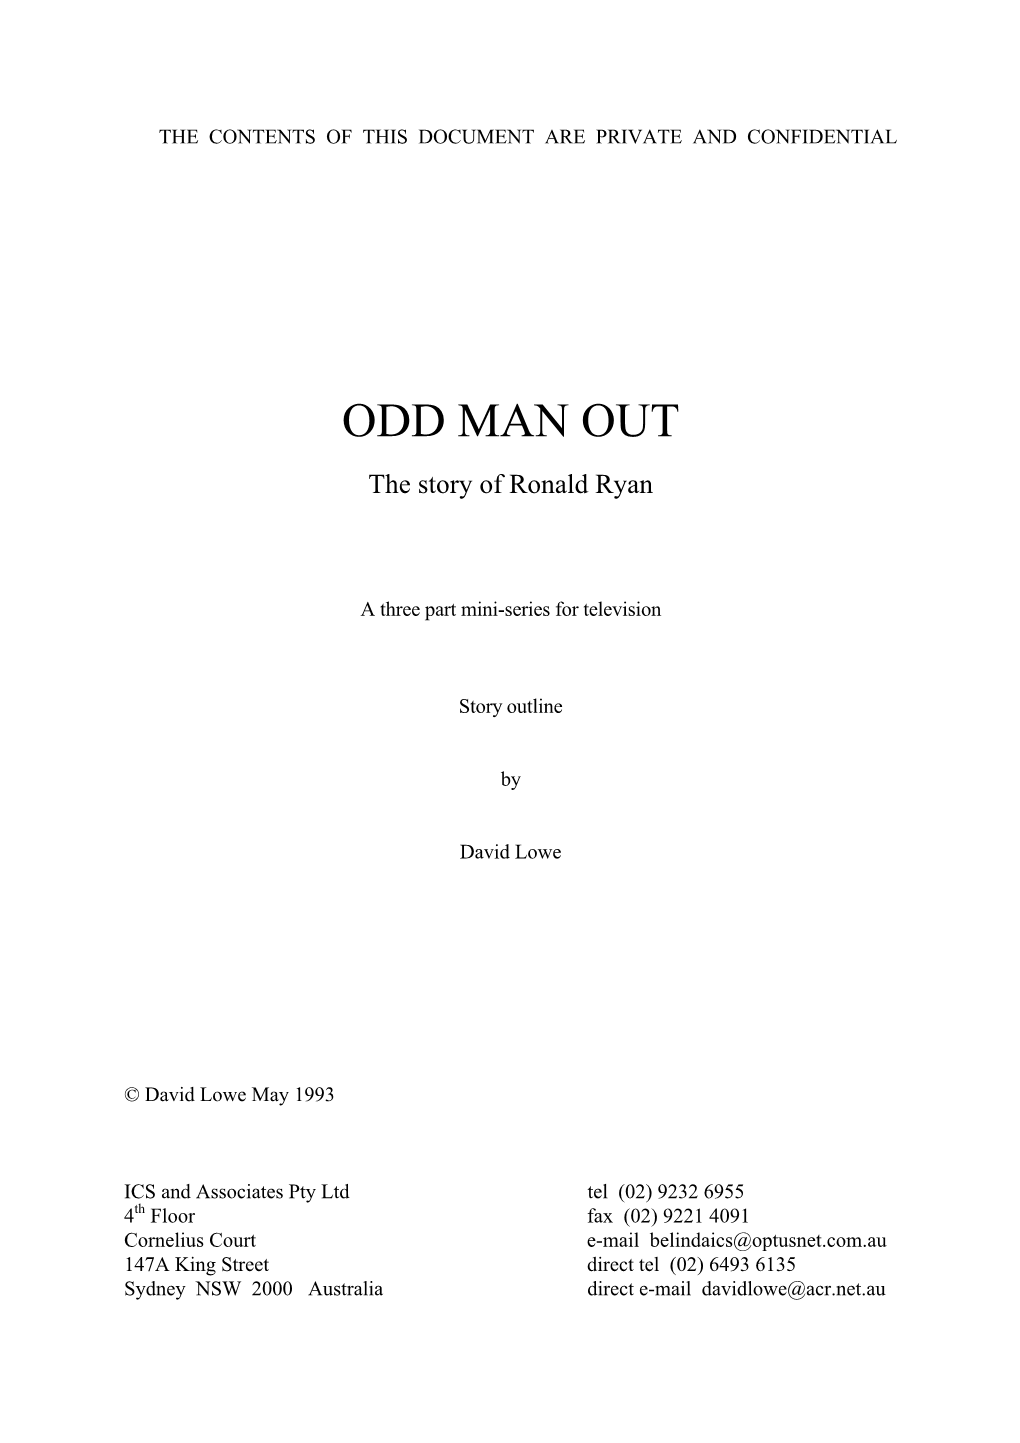 Odd Man out : the Story of Ronald Ryan